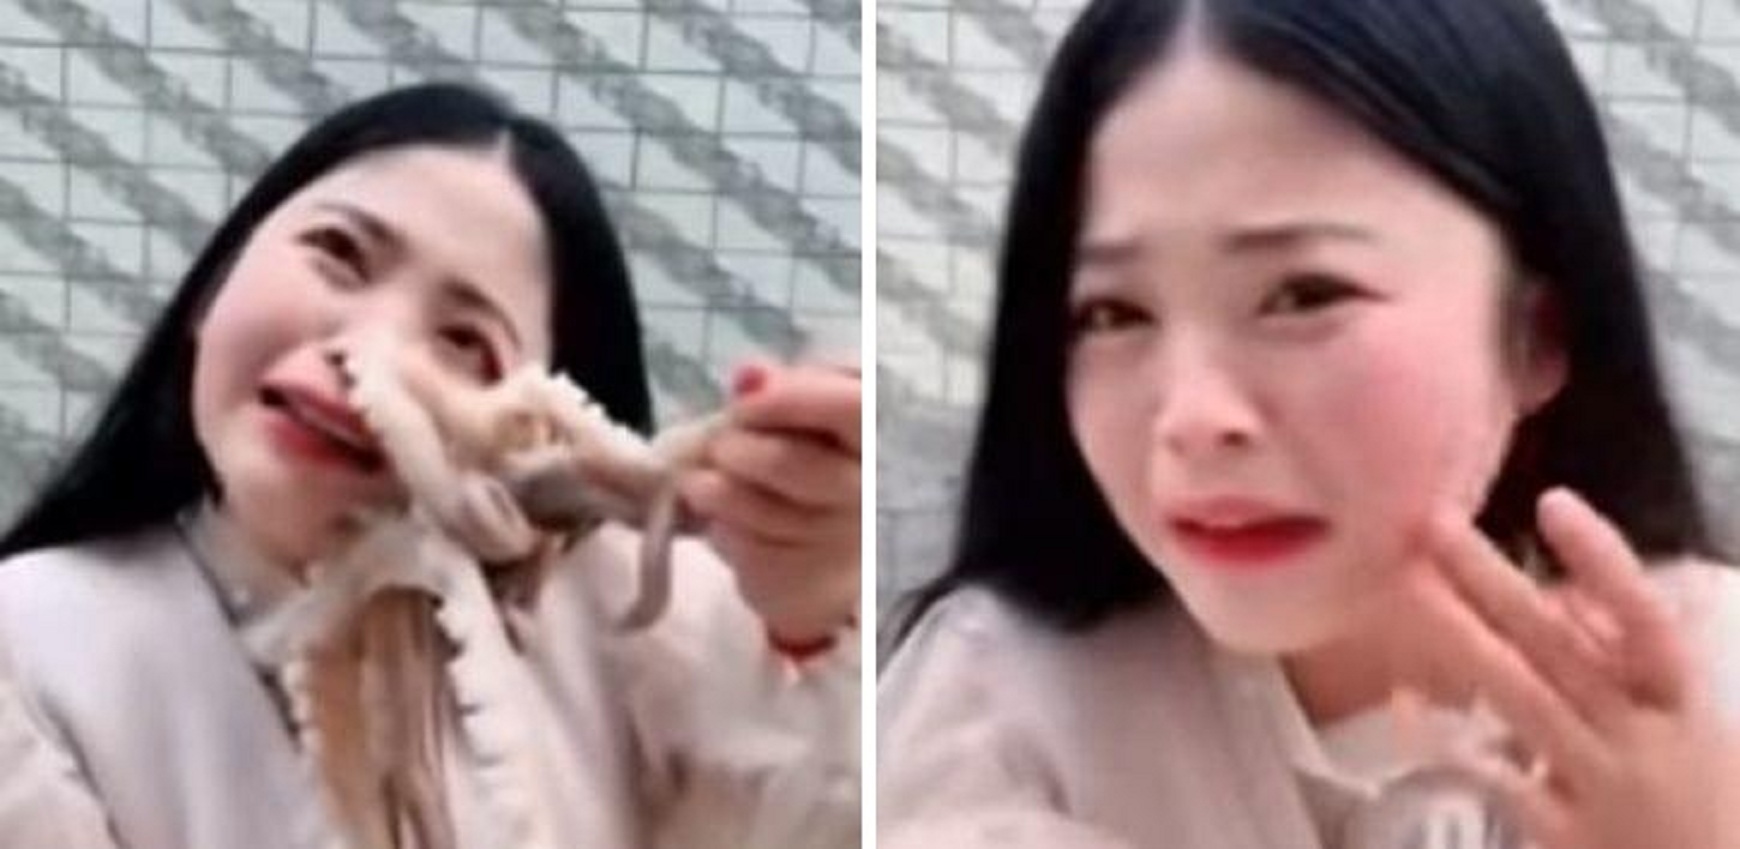 Watch: Octopus Tries To Eat A Chinese Woman’s Face, After She Tries To Eat It Alive!